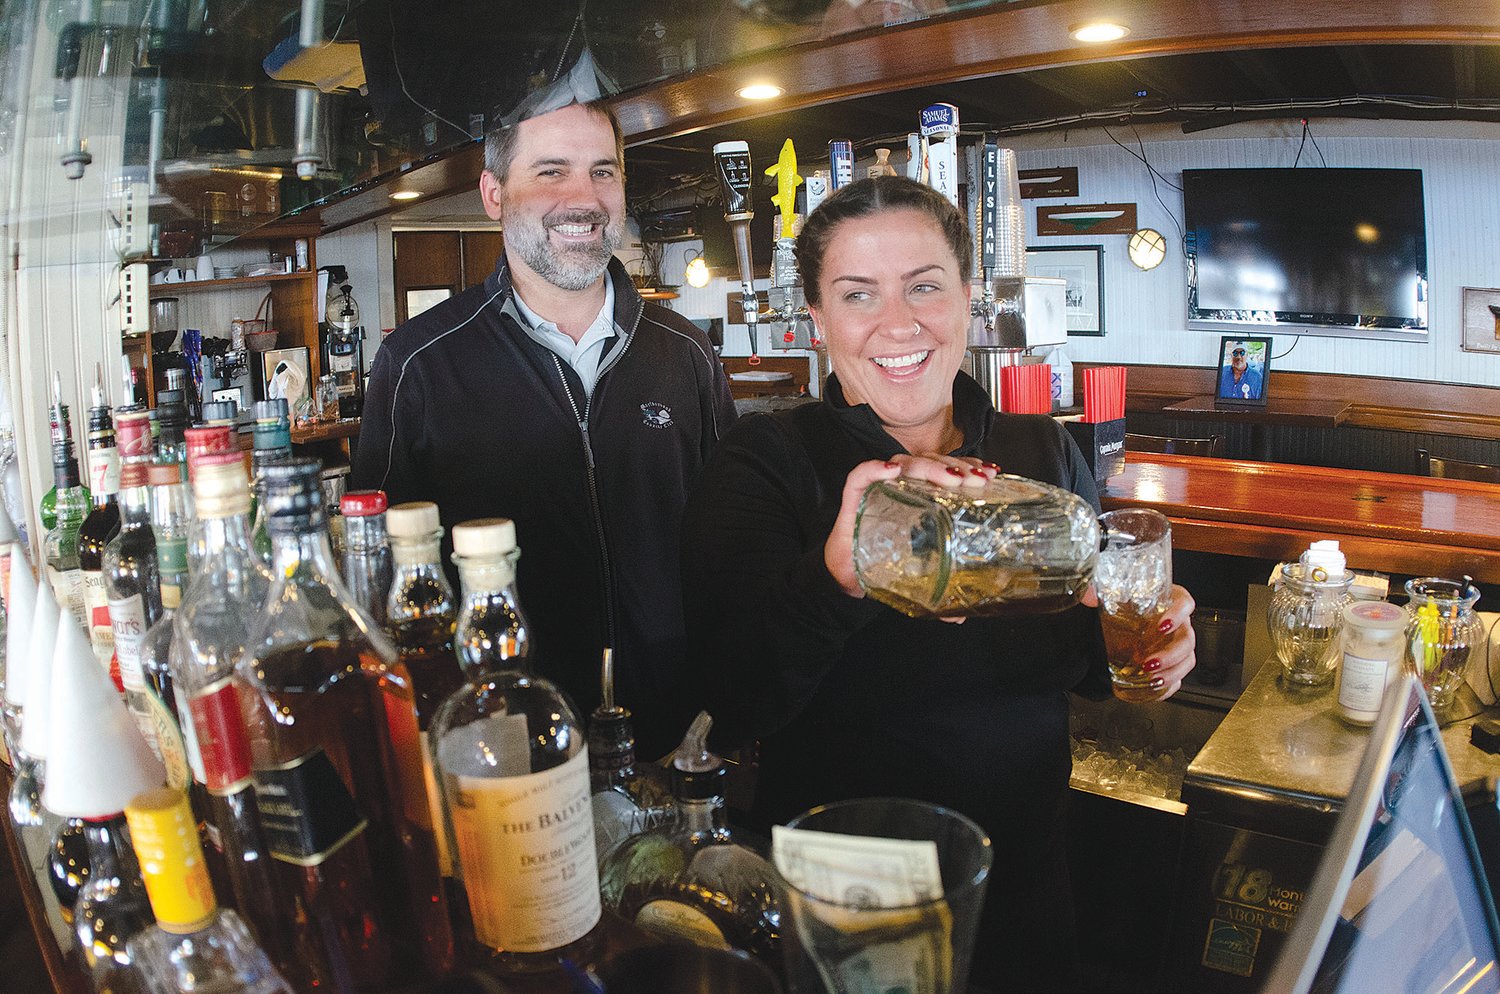 Thames Waterside Grille manager Ben Wachter looks on as bartender Jaime Kuehl pours a drink for a customer during lunch on Friday. Wachter said this summer was “chaotic,” and he thinks the entire industry is facing an inflection point as low-wage workers leave and don’t look back.